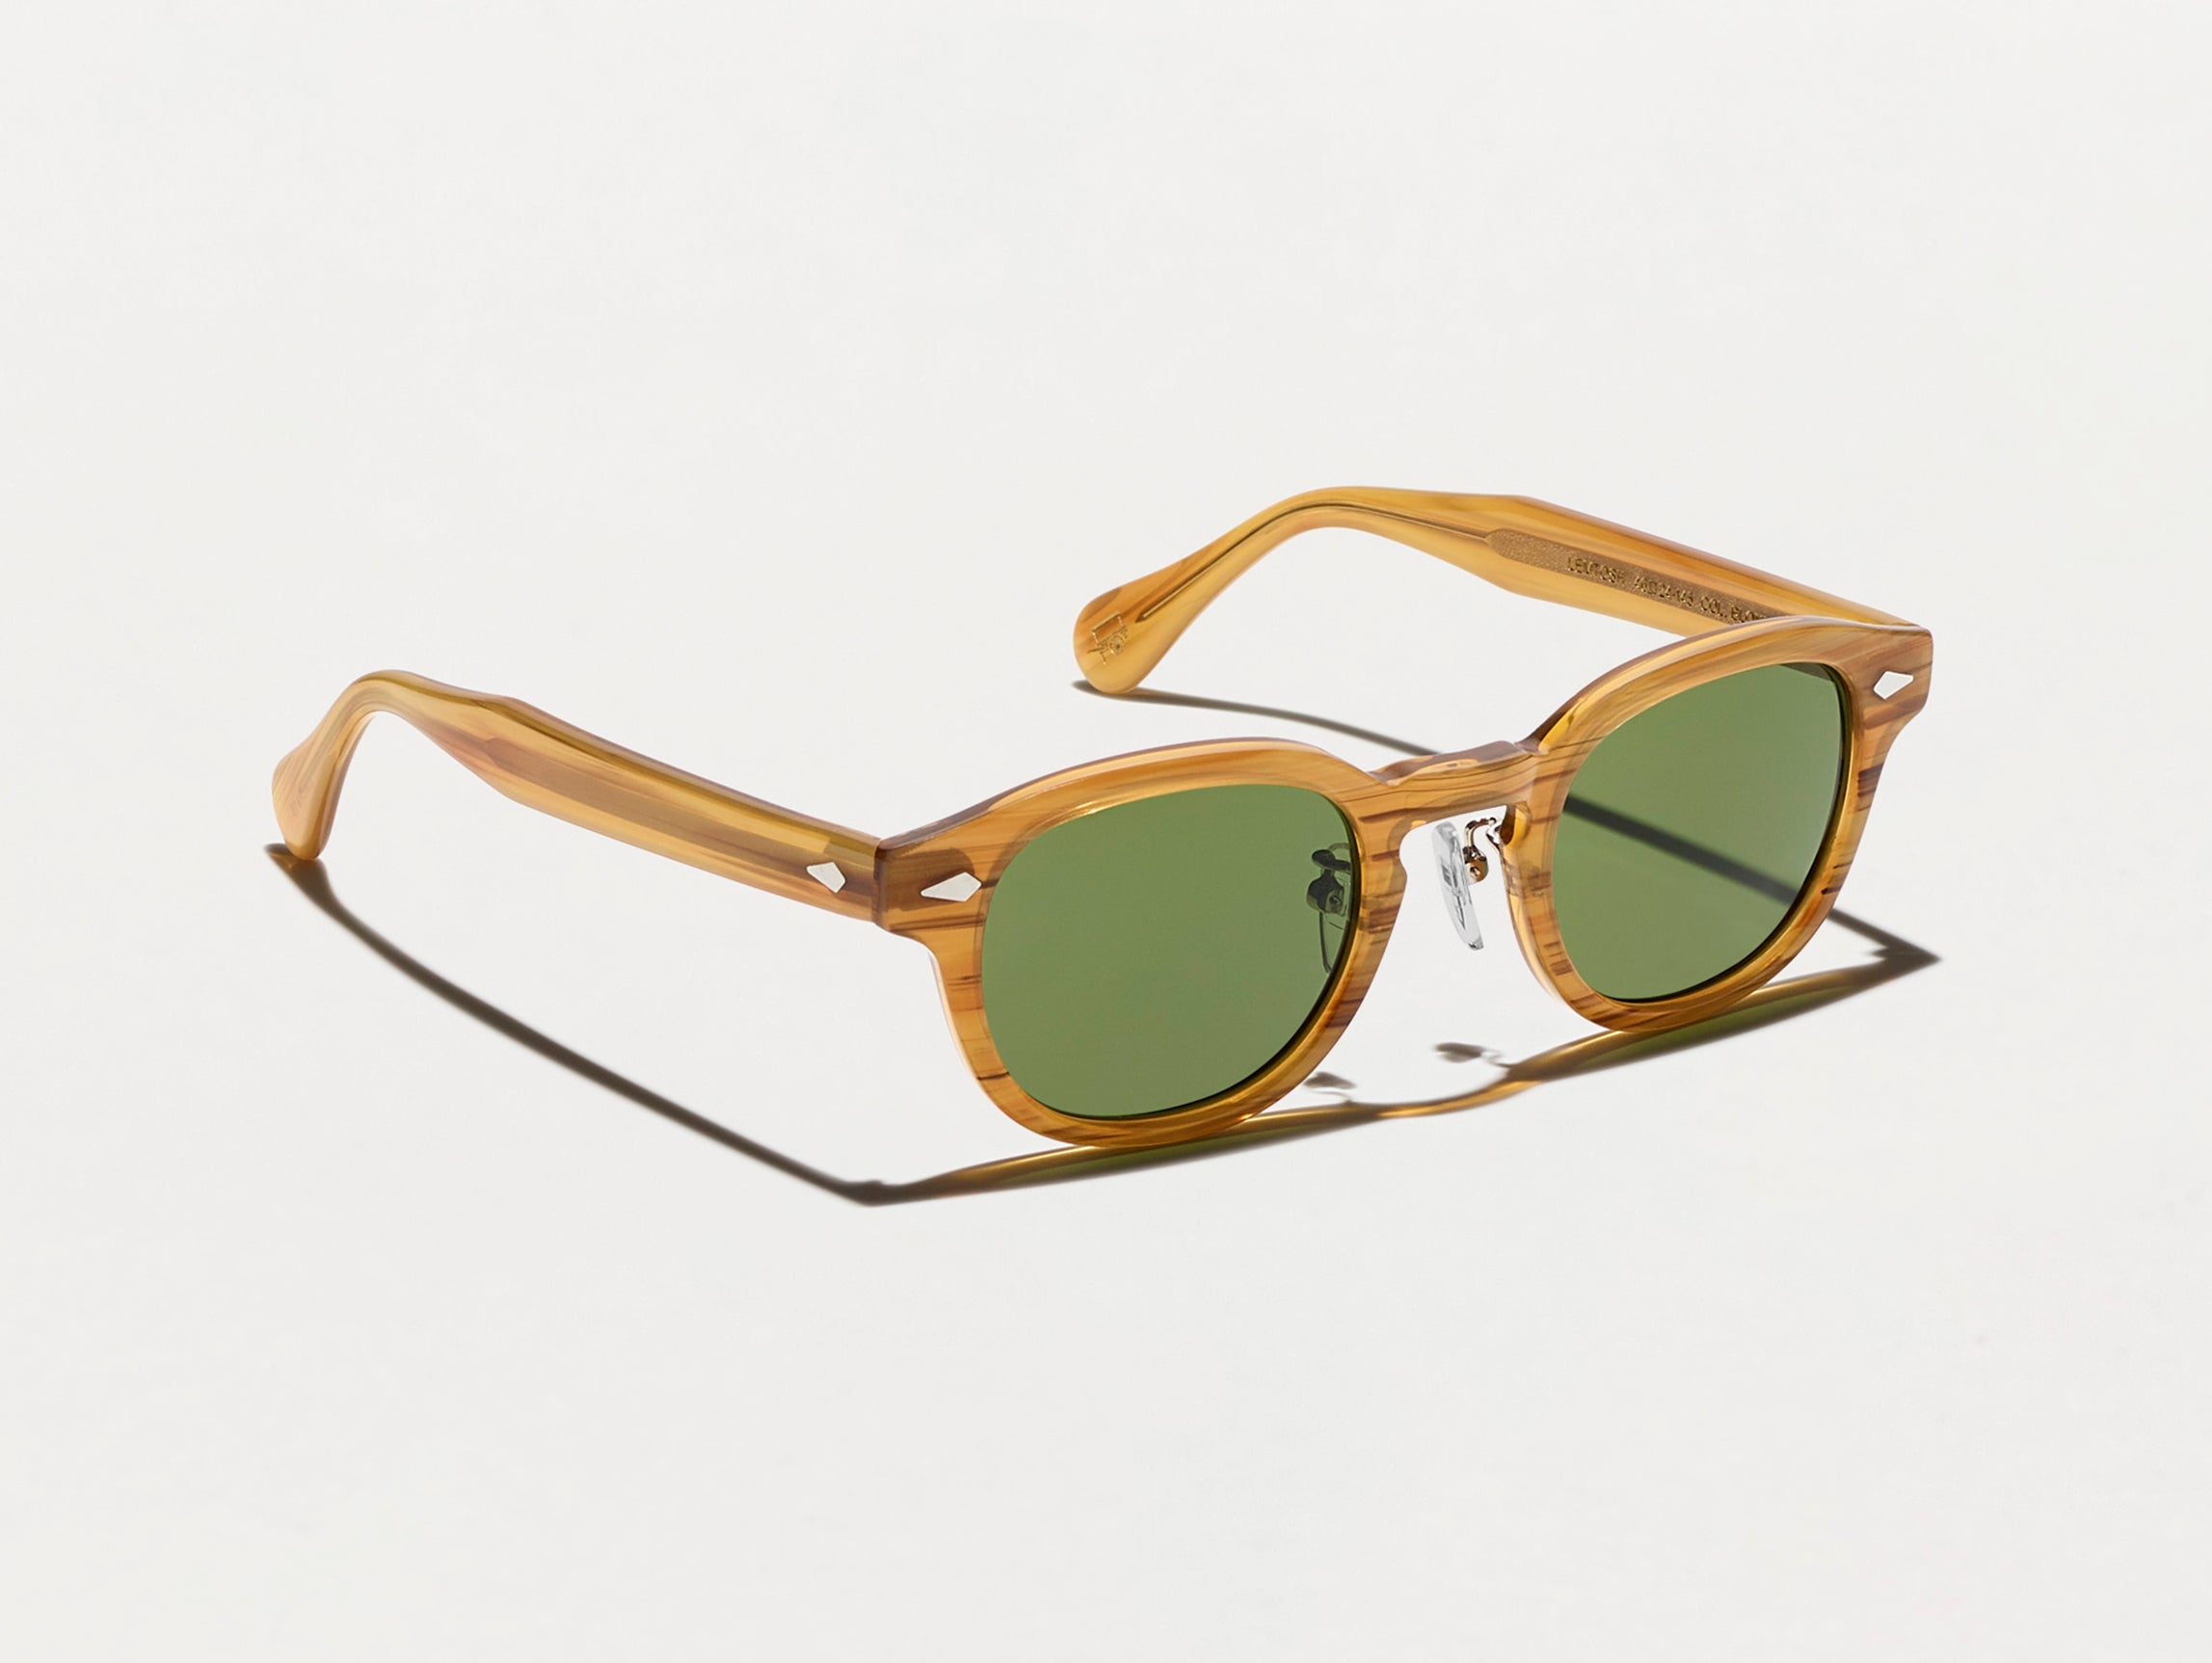 The LEMTOSH SUN with Metal Nose Pads in Blonde with Calibar Green Glass Lenses